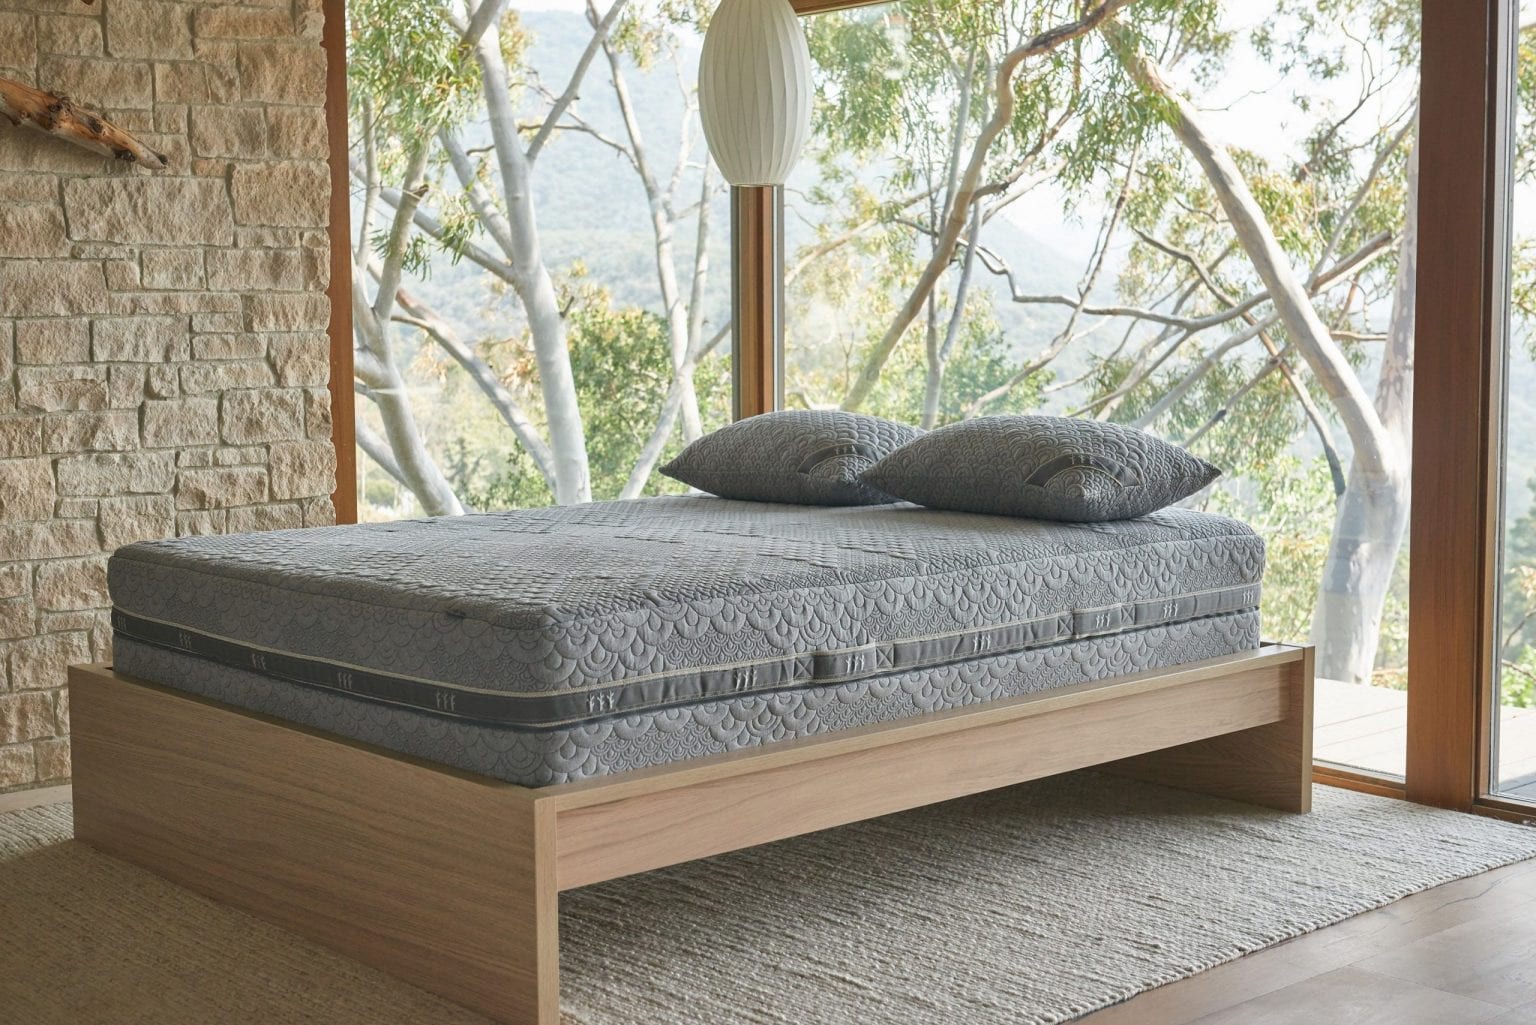 Scaled down product page image of the Brentwood Home Crystal Cove Mattress